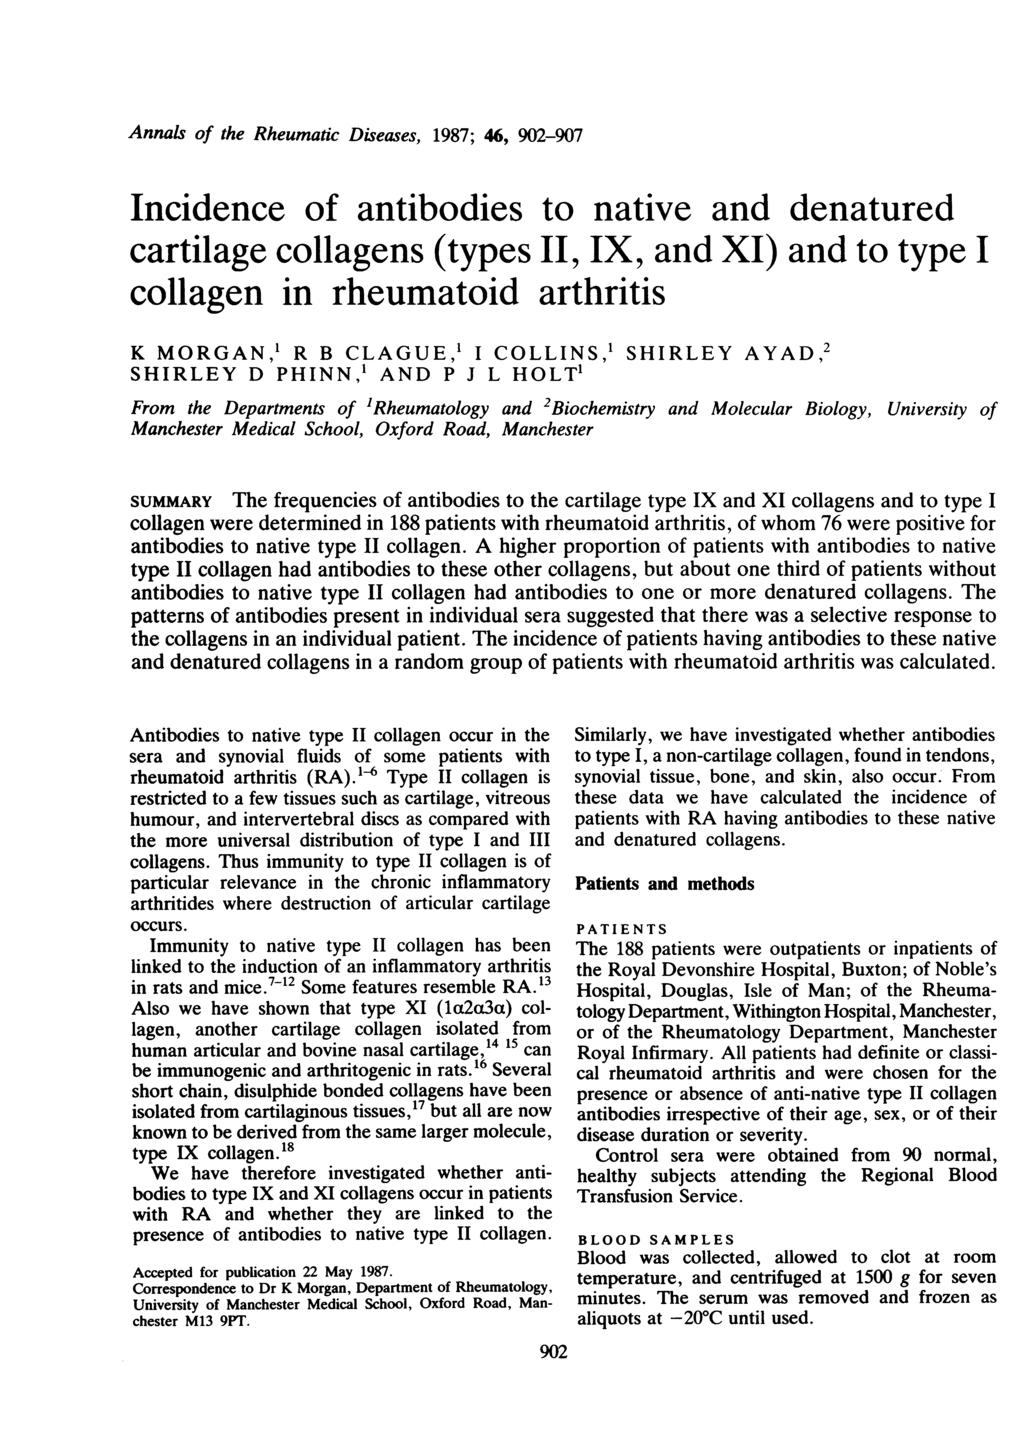 Annals of the Rheumatic Diseases, 1987; 46, 902-907 Incidence of antibodies to native and denatured cartilage collagens (types II, IX, and XI) and to type I collagen in rheumatoid arthritis K